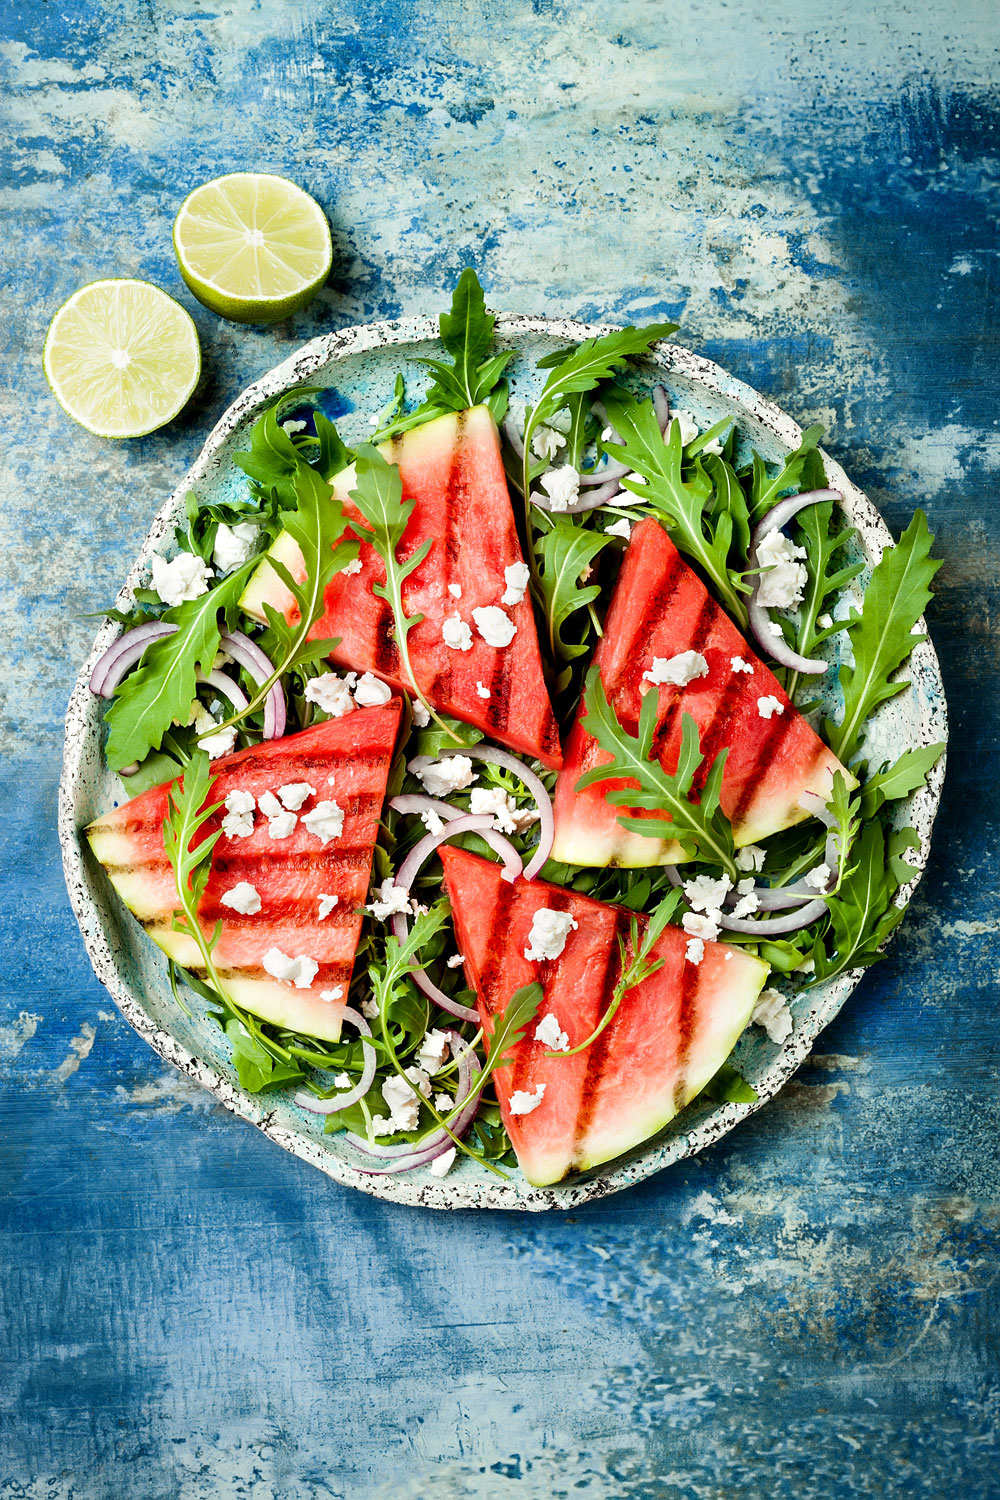 Fourth July Recipe: How To Make Grilled Watermelon